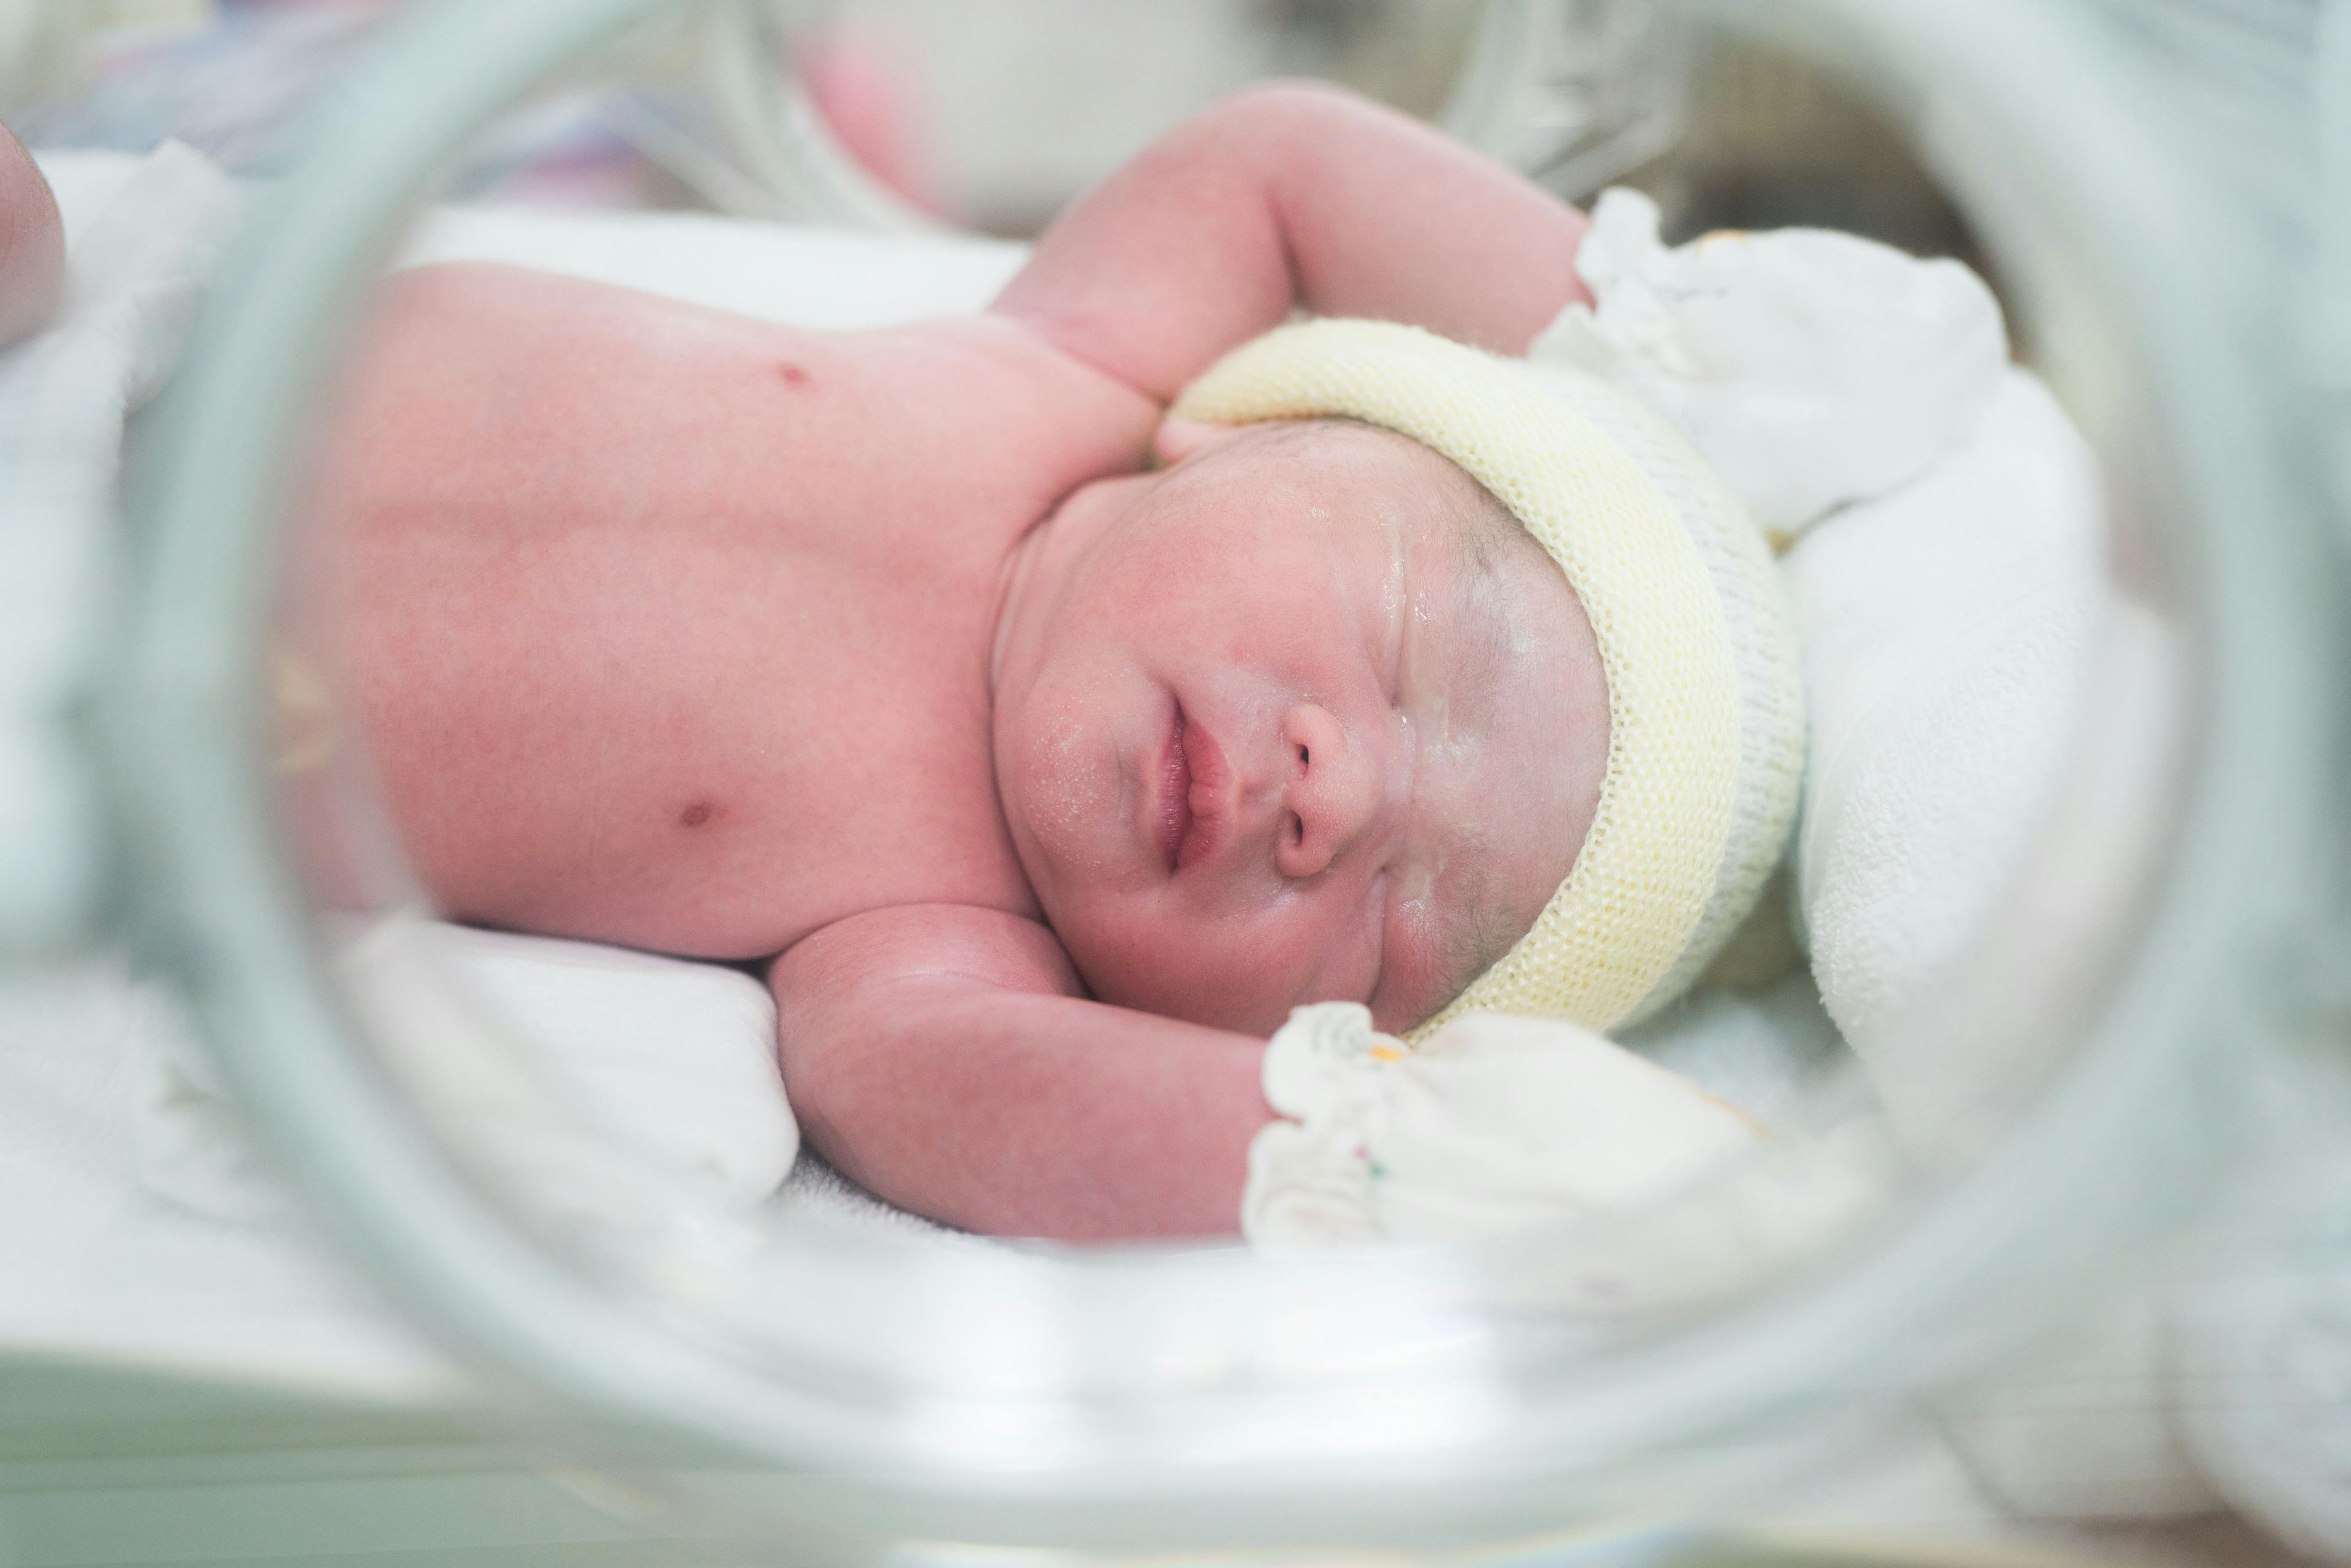 Mothers and Fathers With Psychiatric Histories Face Higher Risk of Preterm Births